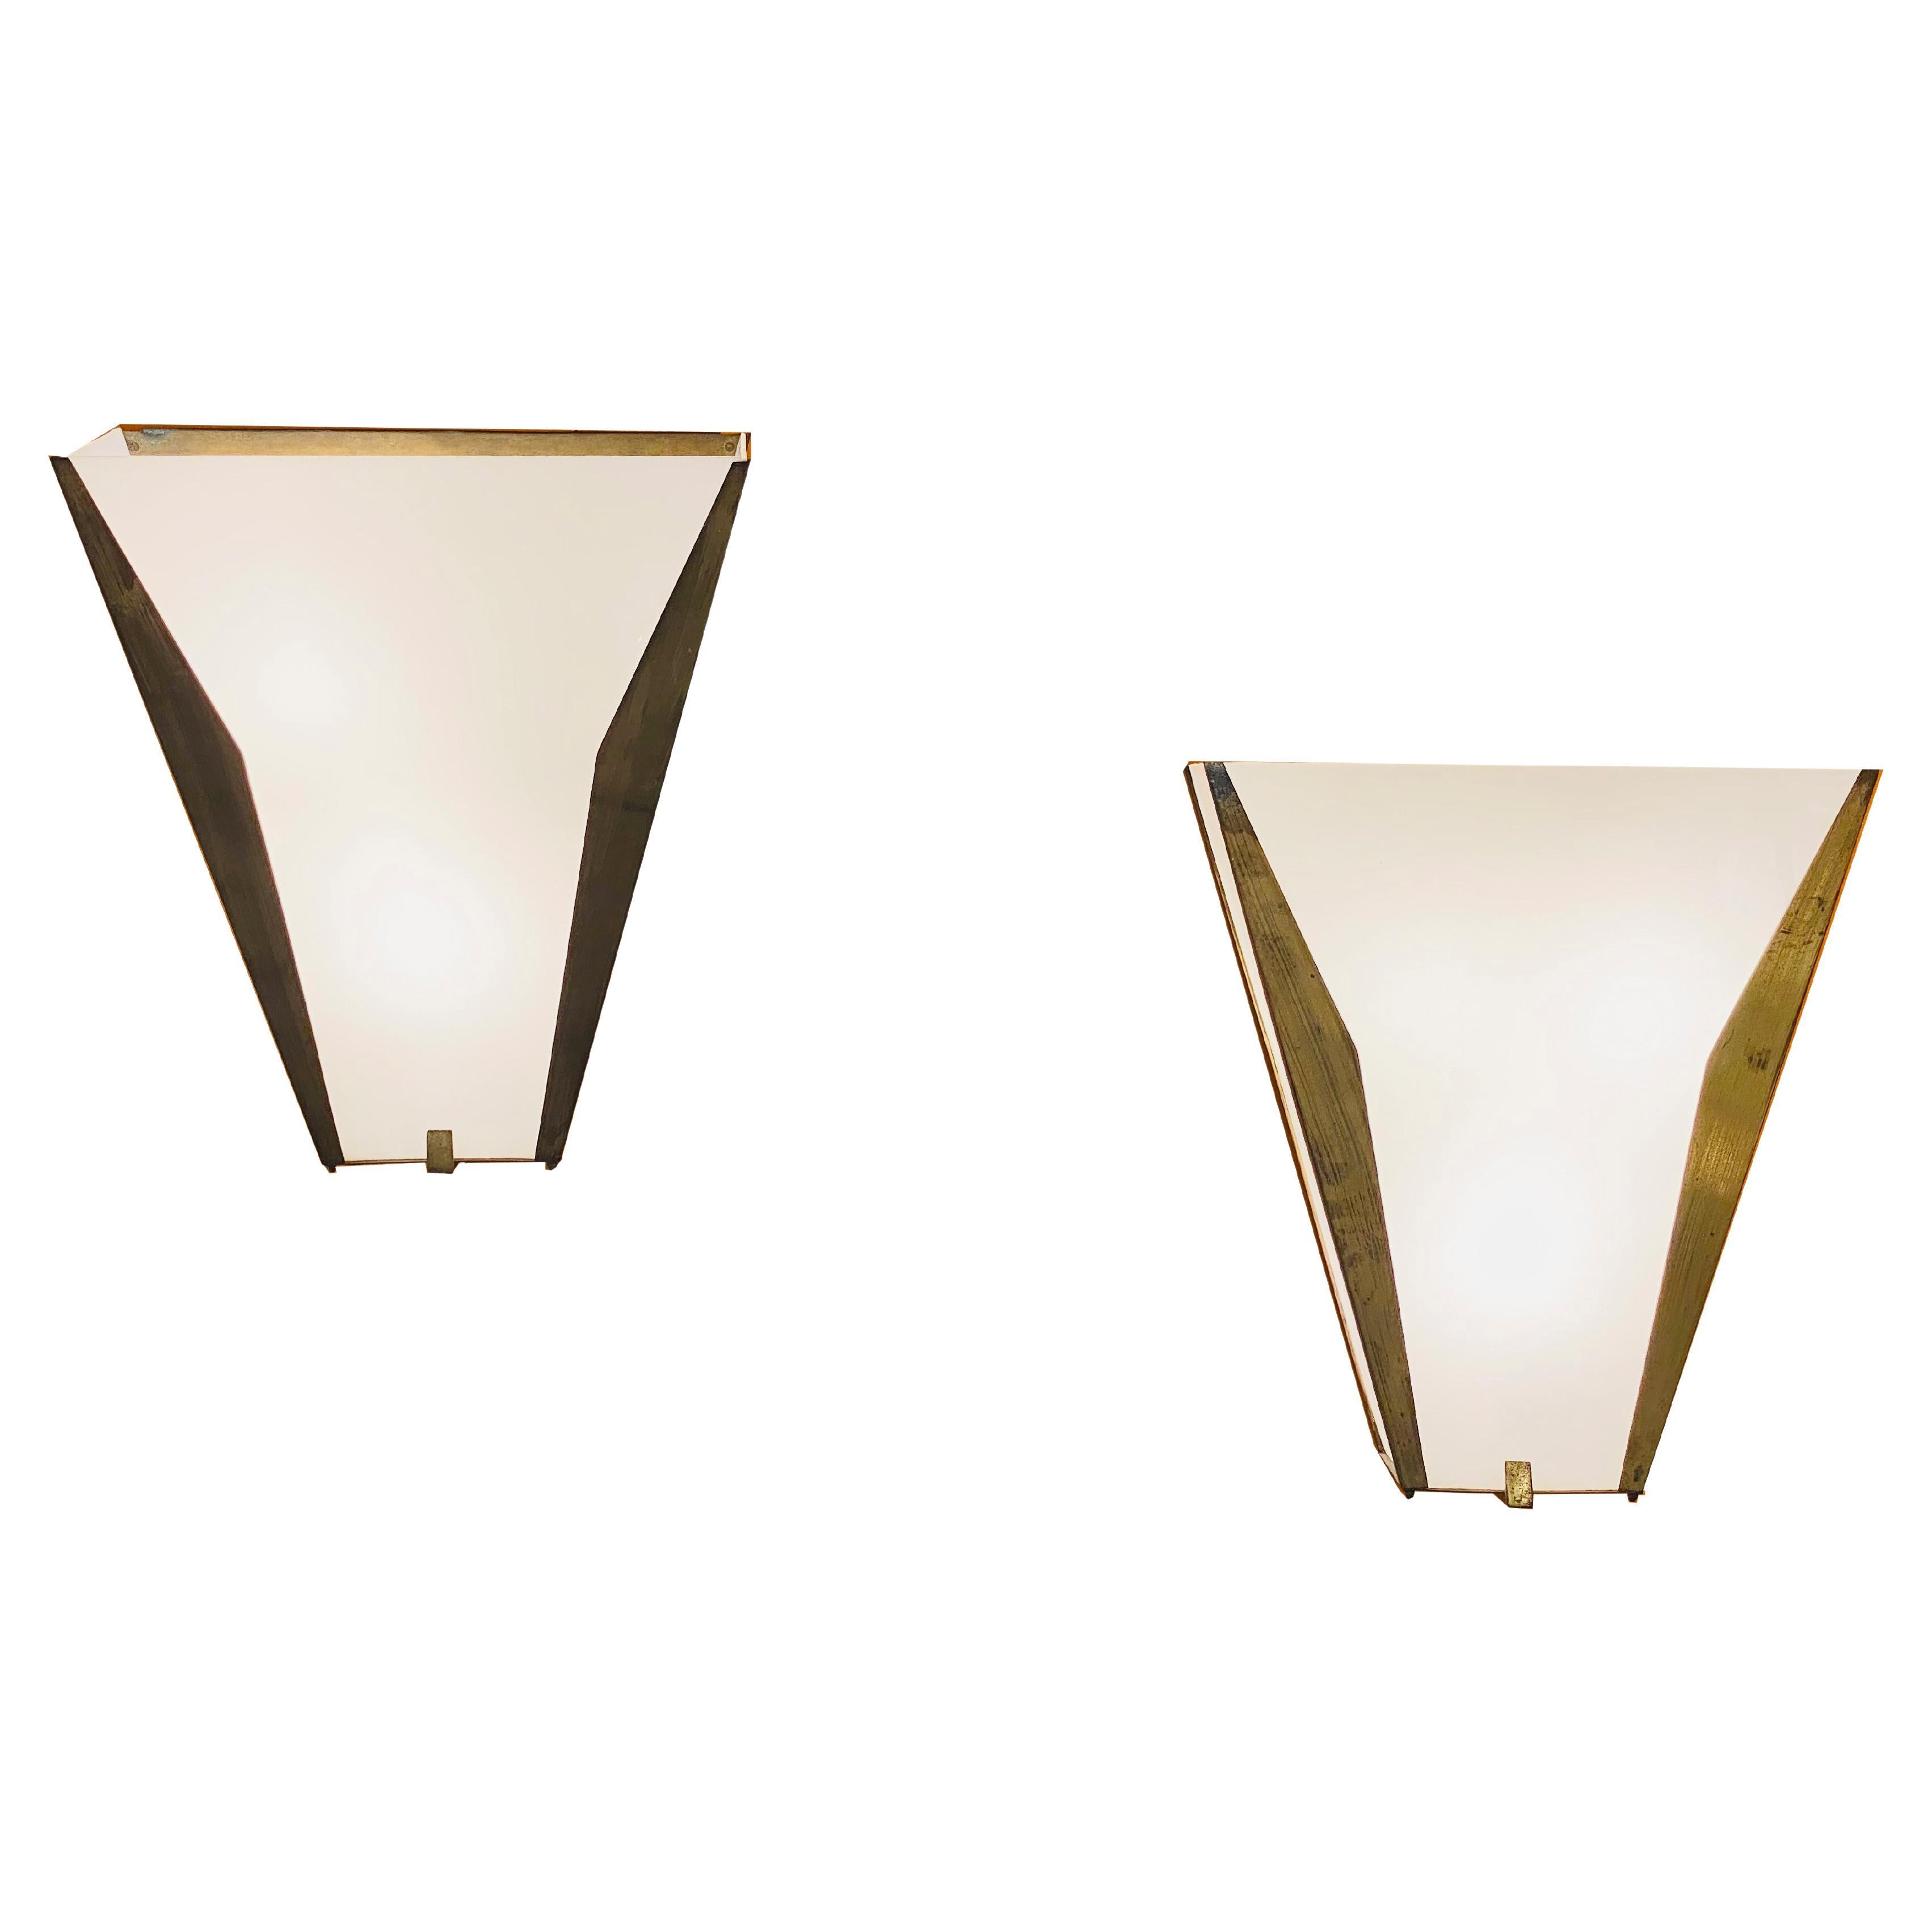 Gino Avena Perspex and Brass Wall Lamp, Italy, 1950s For Sale